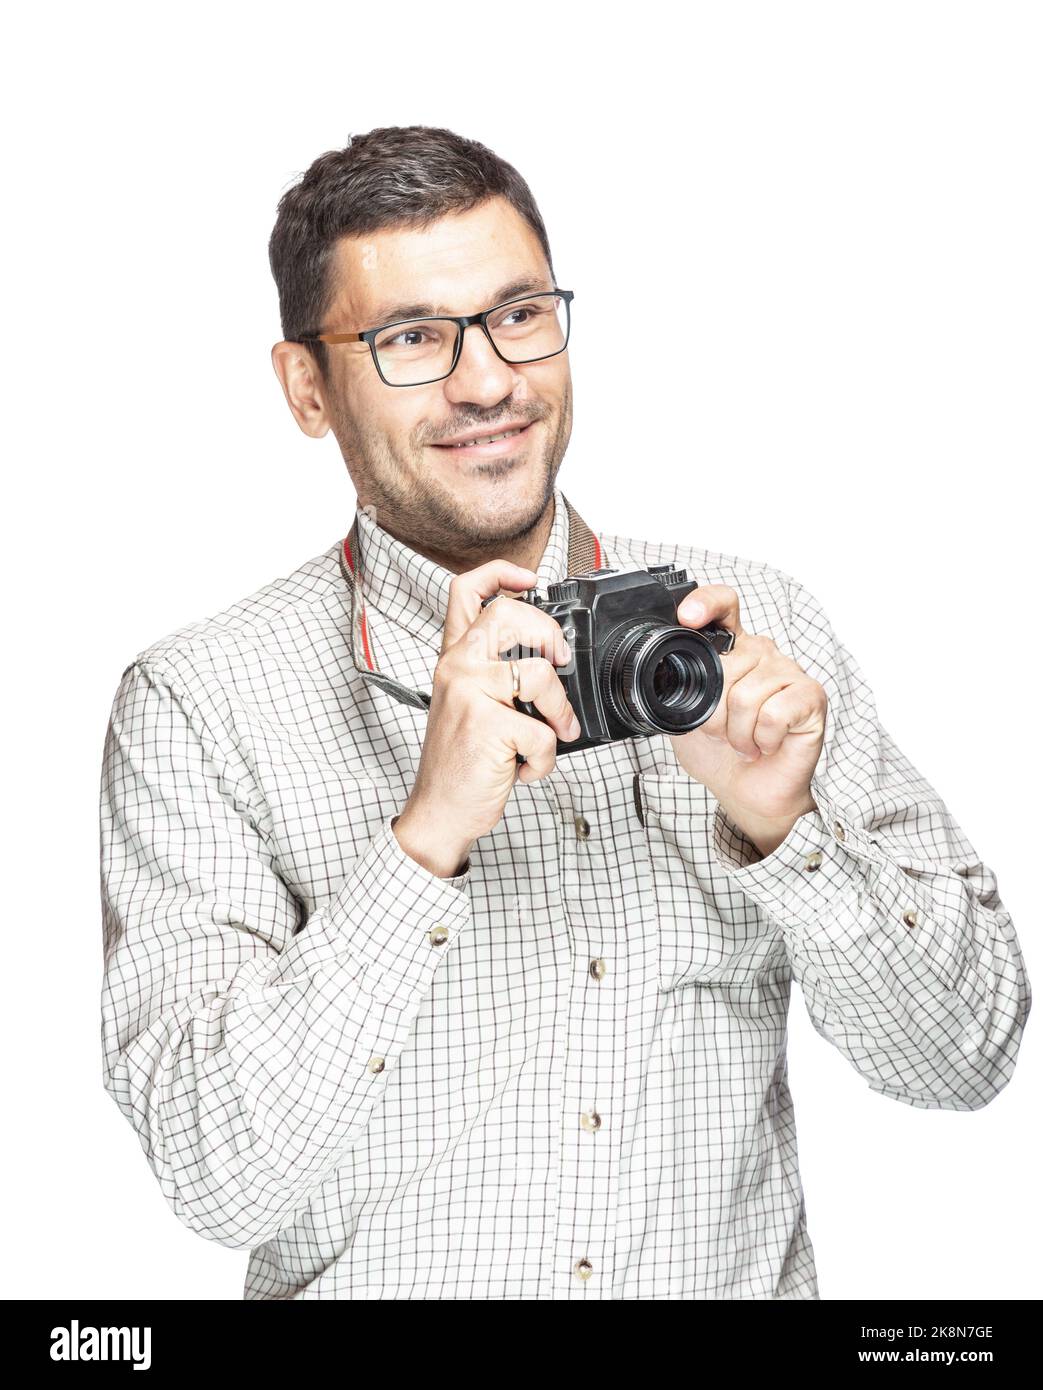 Handsome man in glasses and a plaid shirt, smiling and taking pictures with an vintage camera Stock Photo